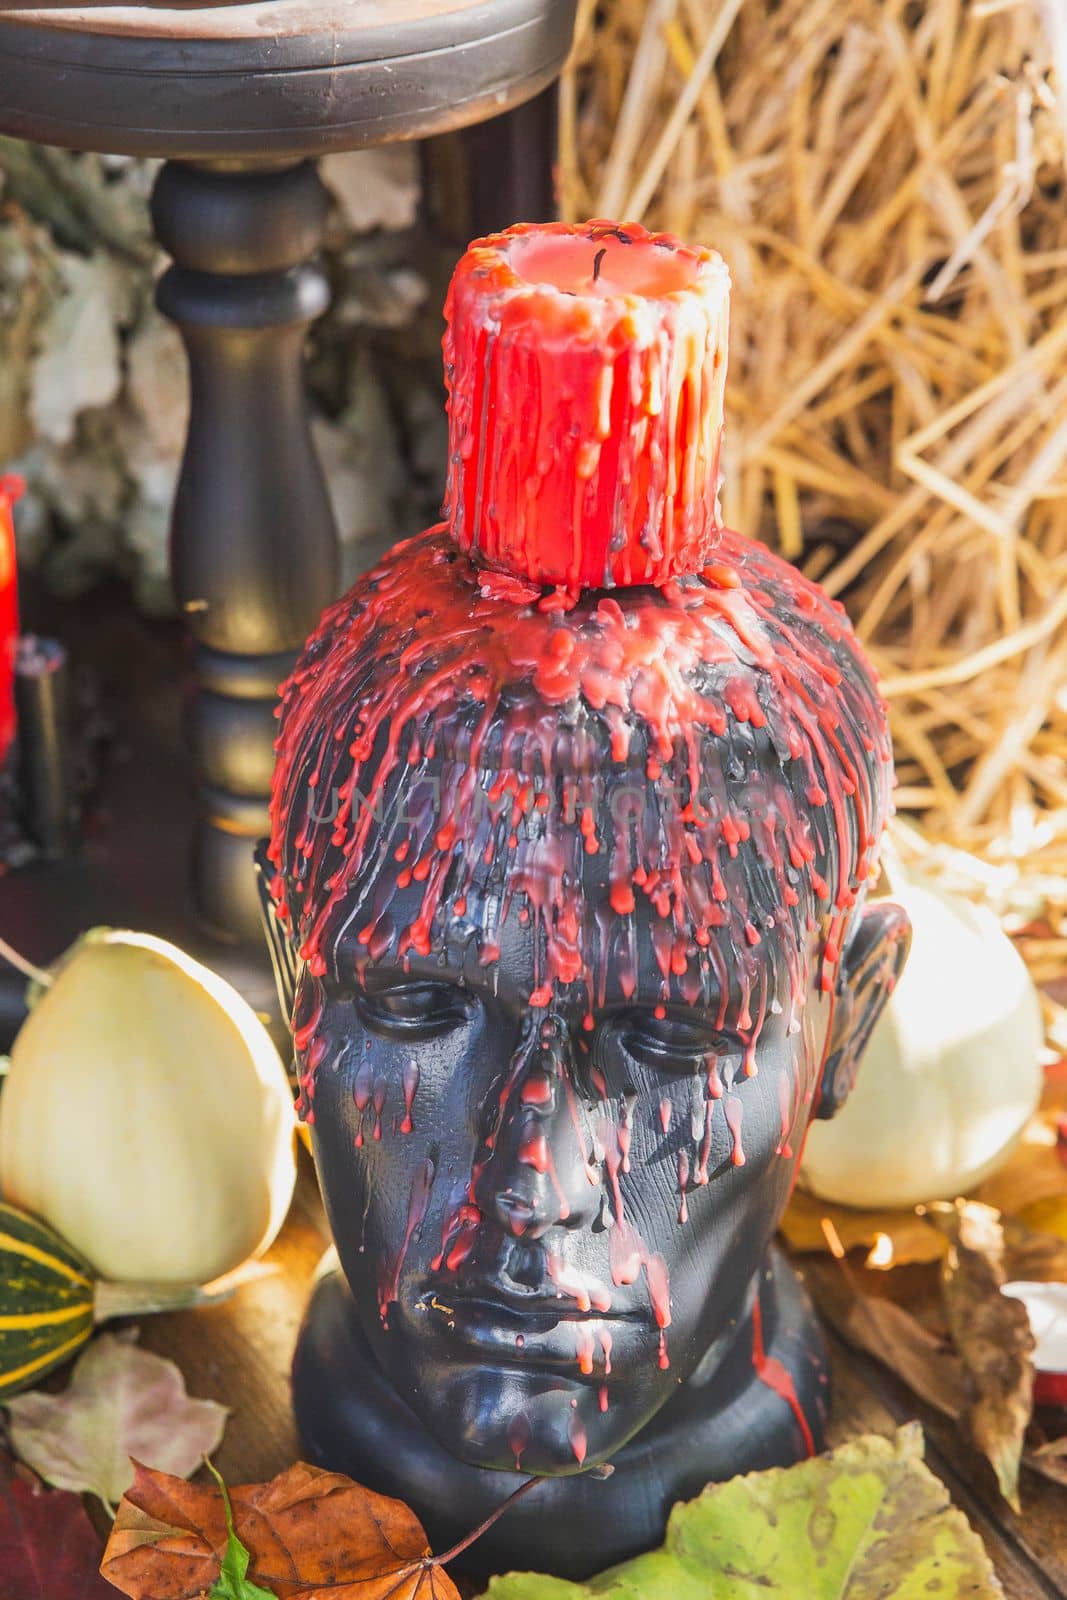 Mannequin head with candle and wax drips for Halloween.